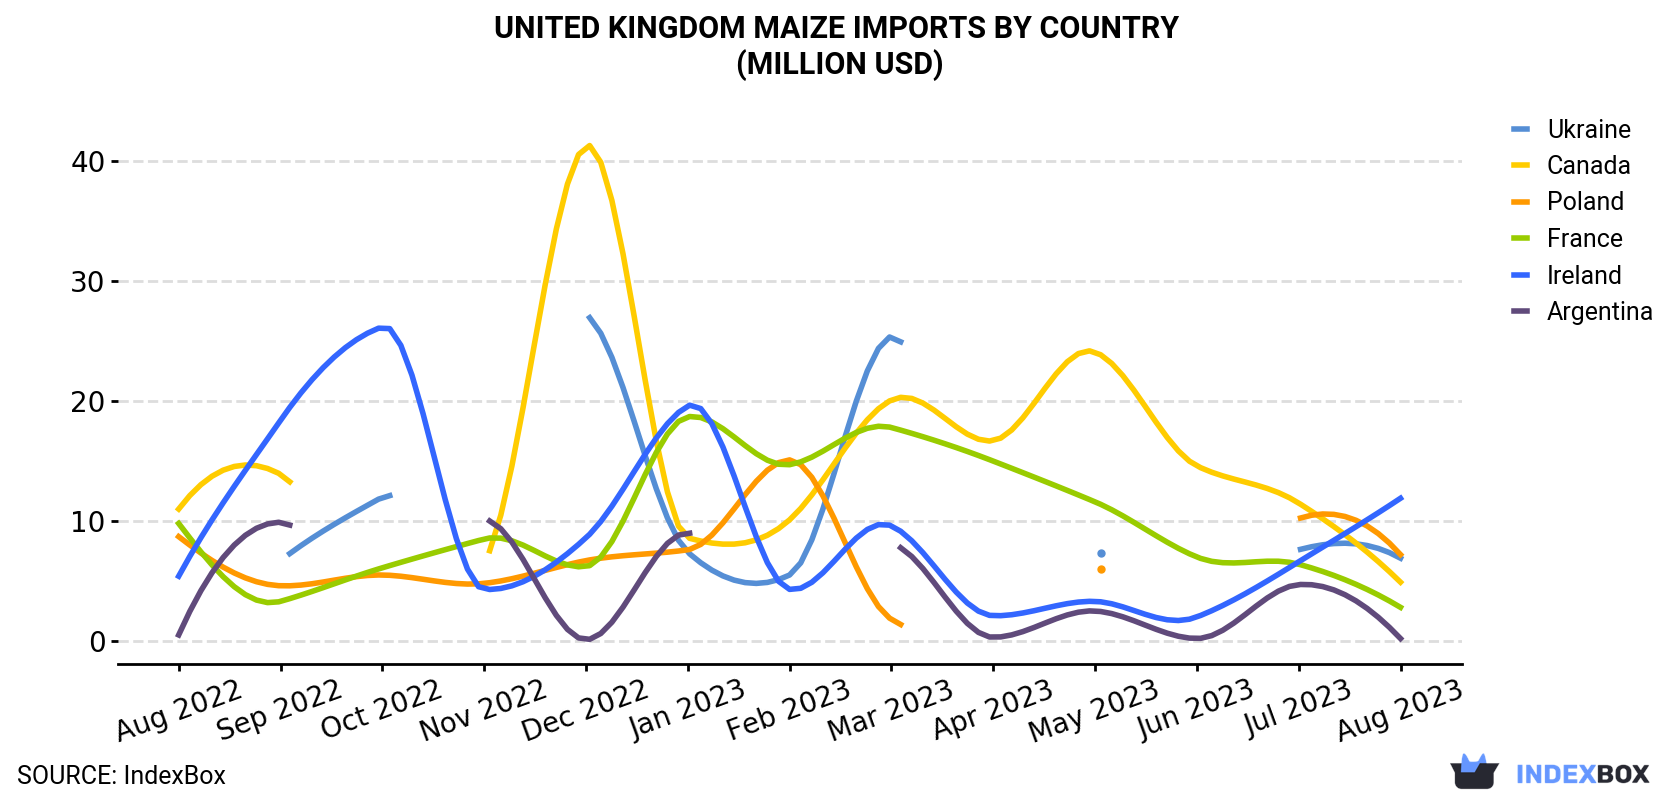 United Kingdom Maize Imports By Country (Million USD)